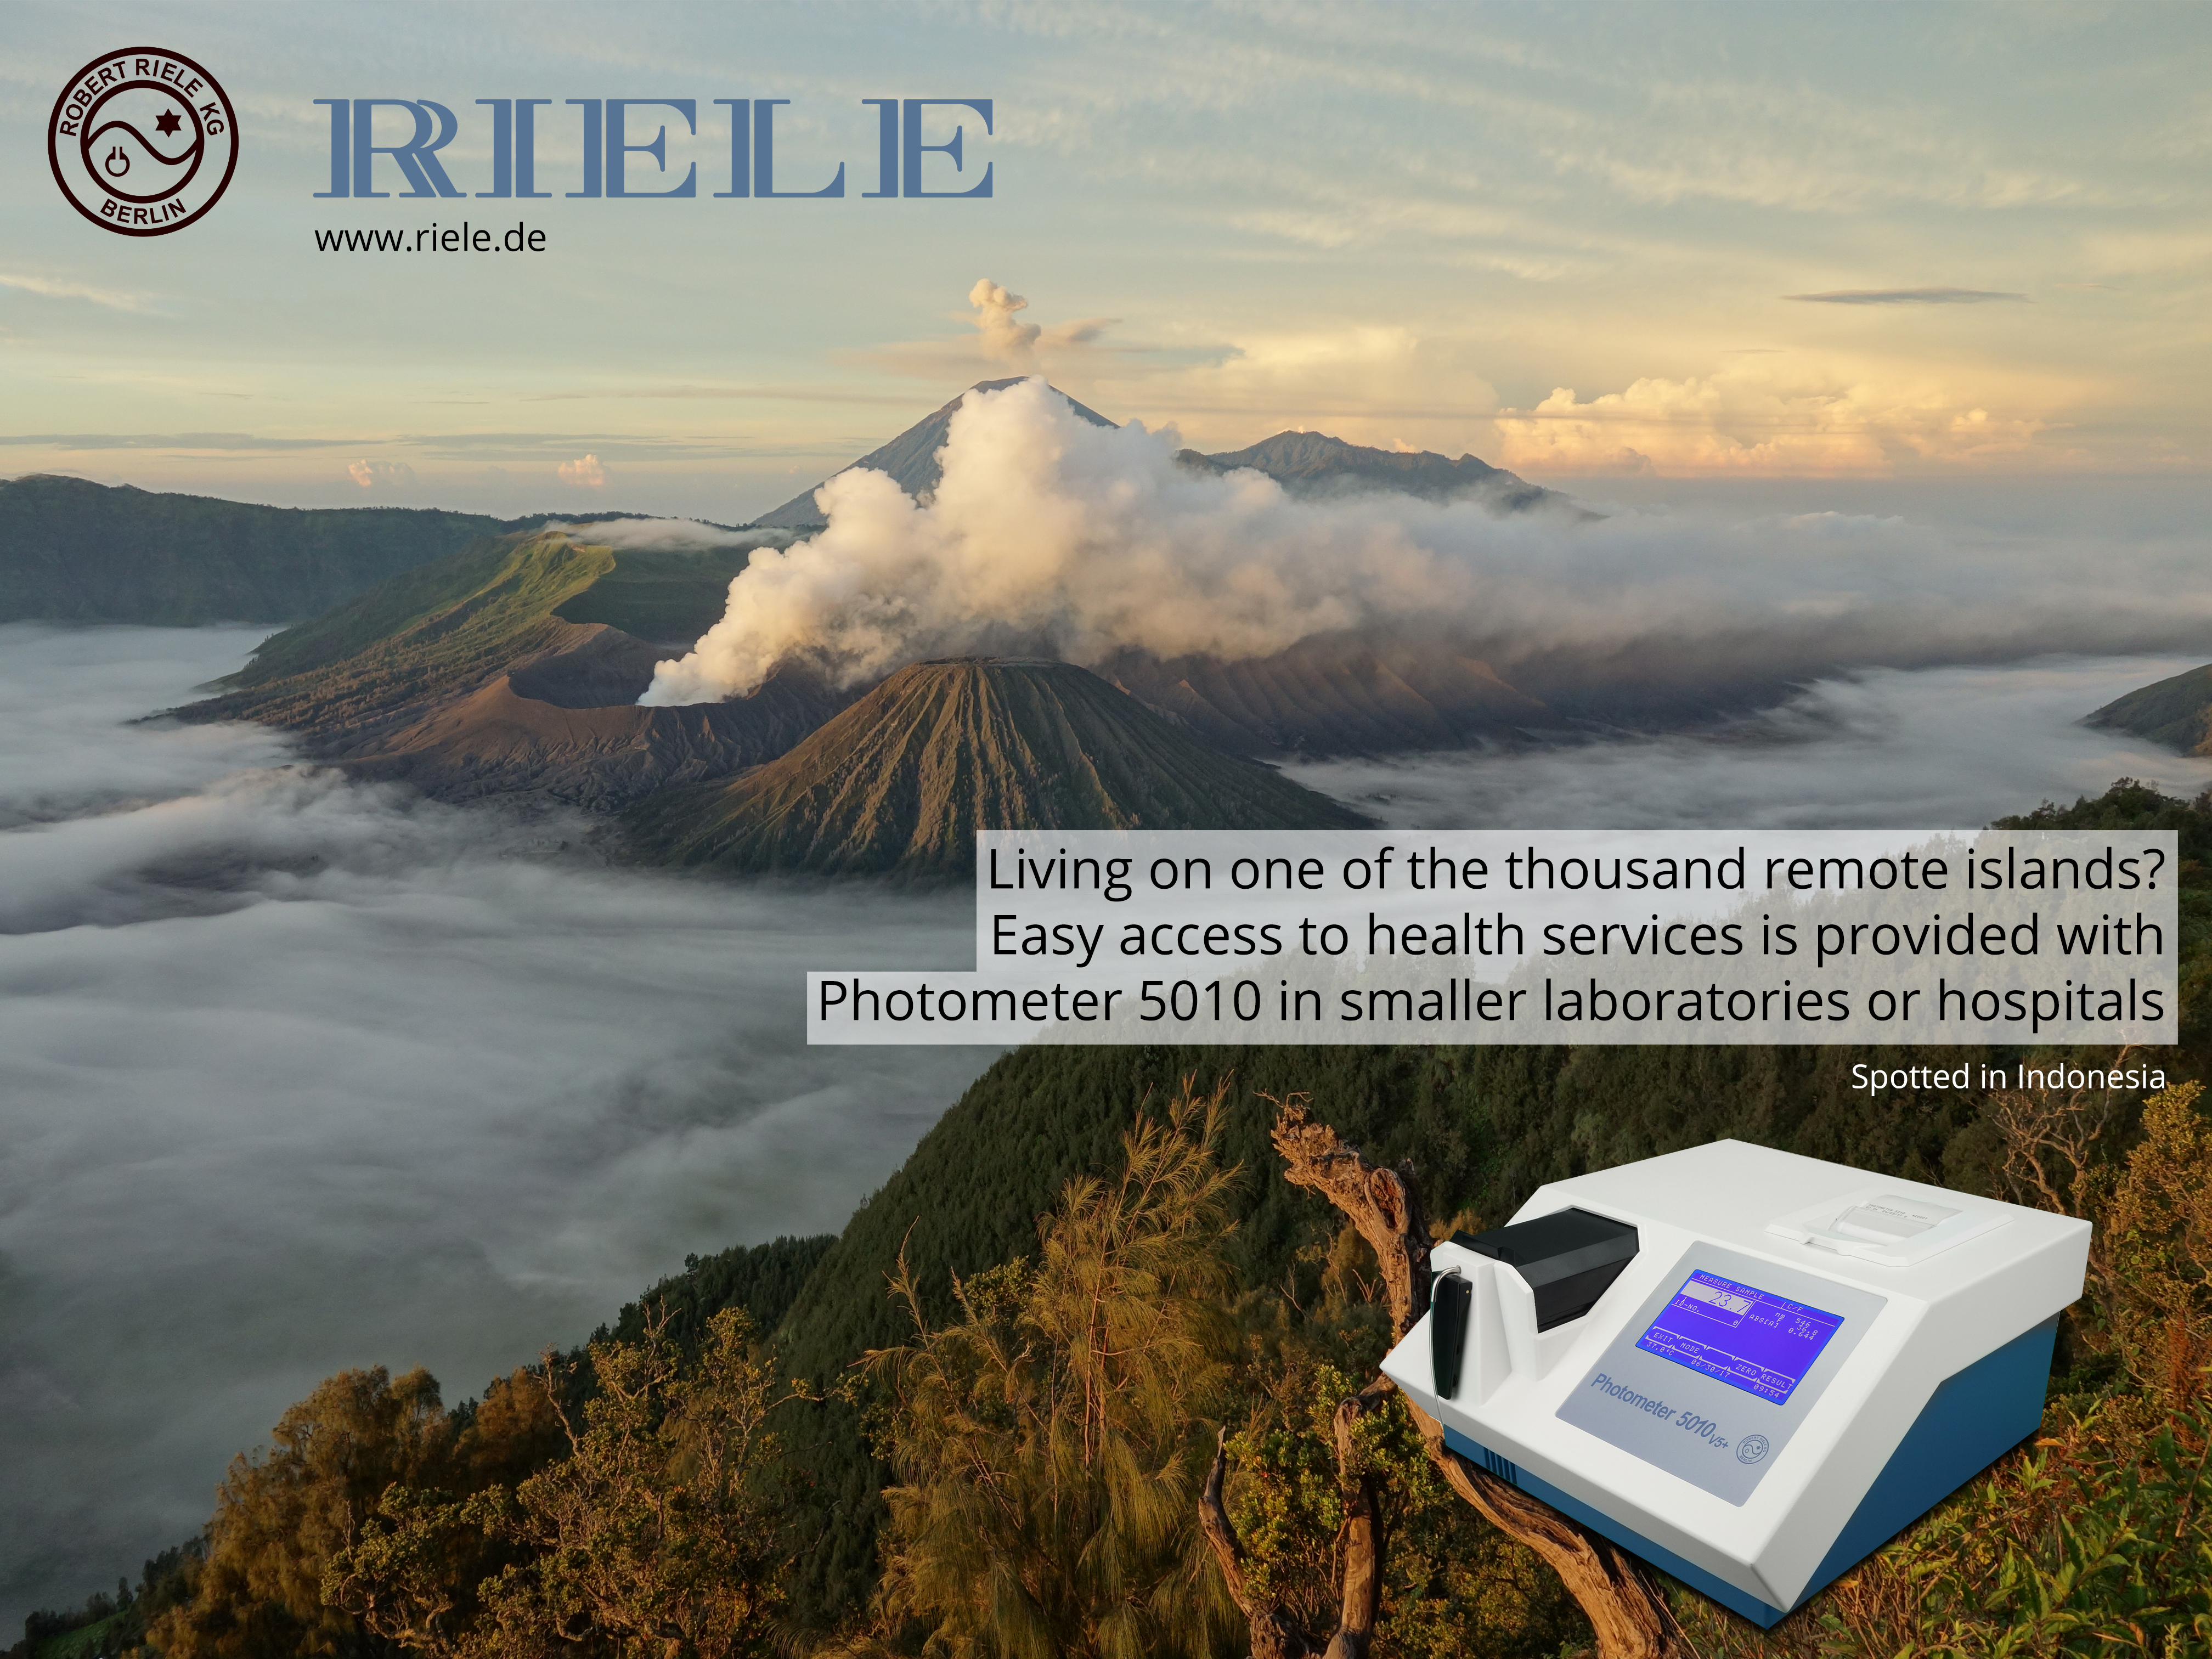 Photometer 5010 in Indonesia